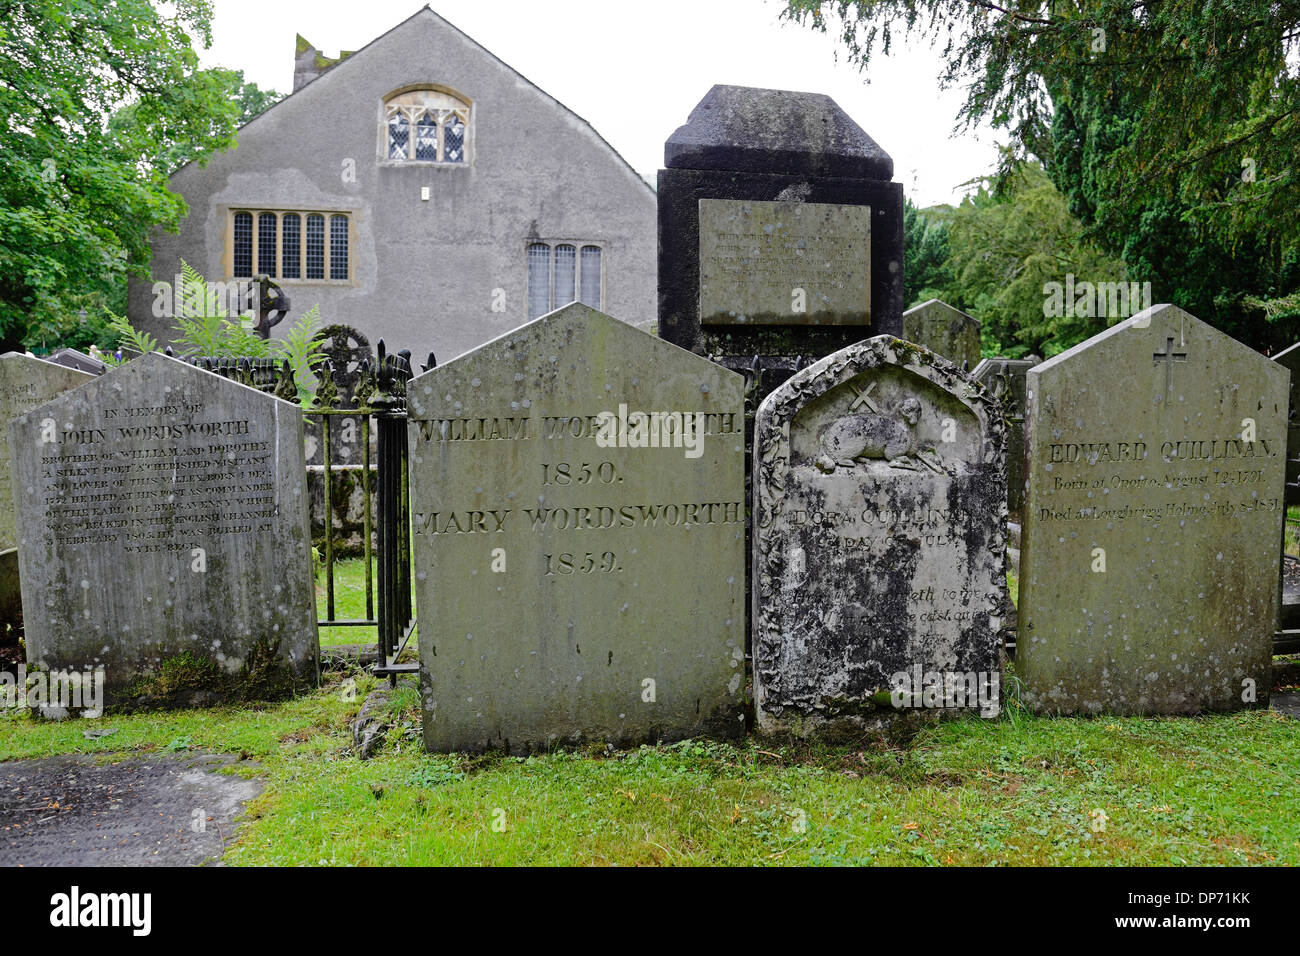 Graves of John, William and Mary Wordsworth and Dora and Edward Quillinan, St. Oswalds Churchyard, Grasmere, Lake District, Cumbria, England, UK Stockfoto